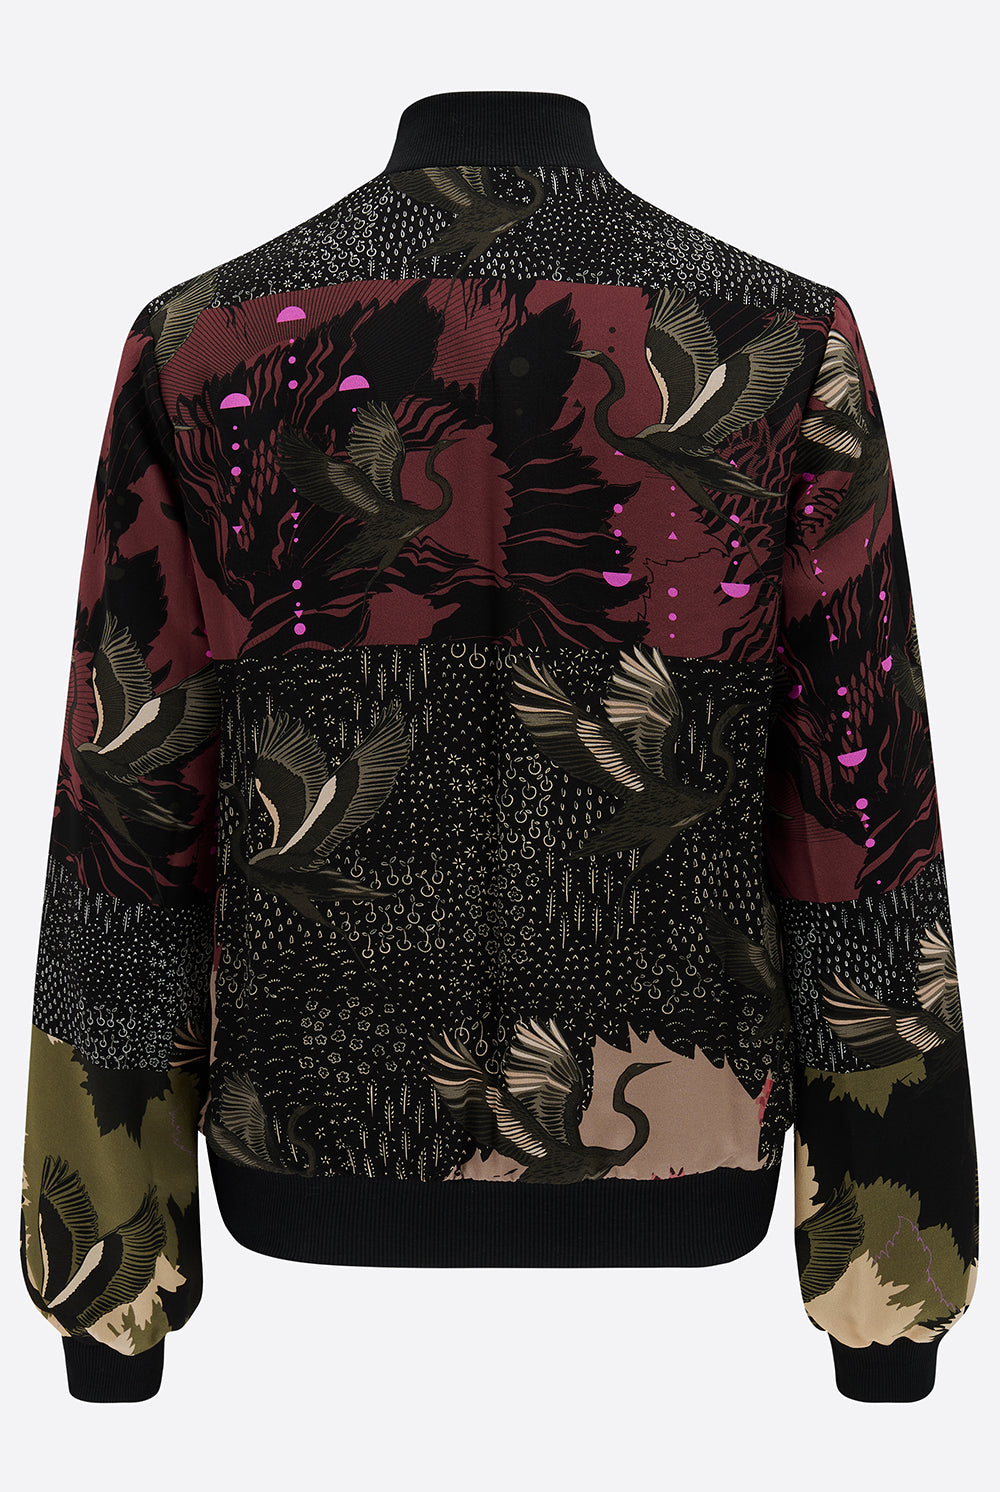 The black of a silk printed bomber jacket in black and pink